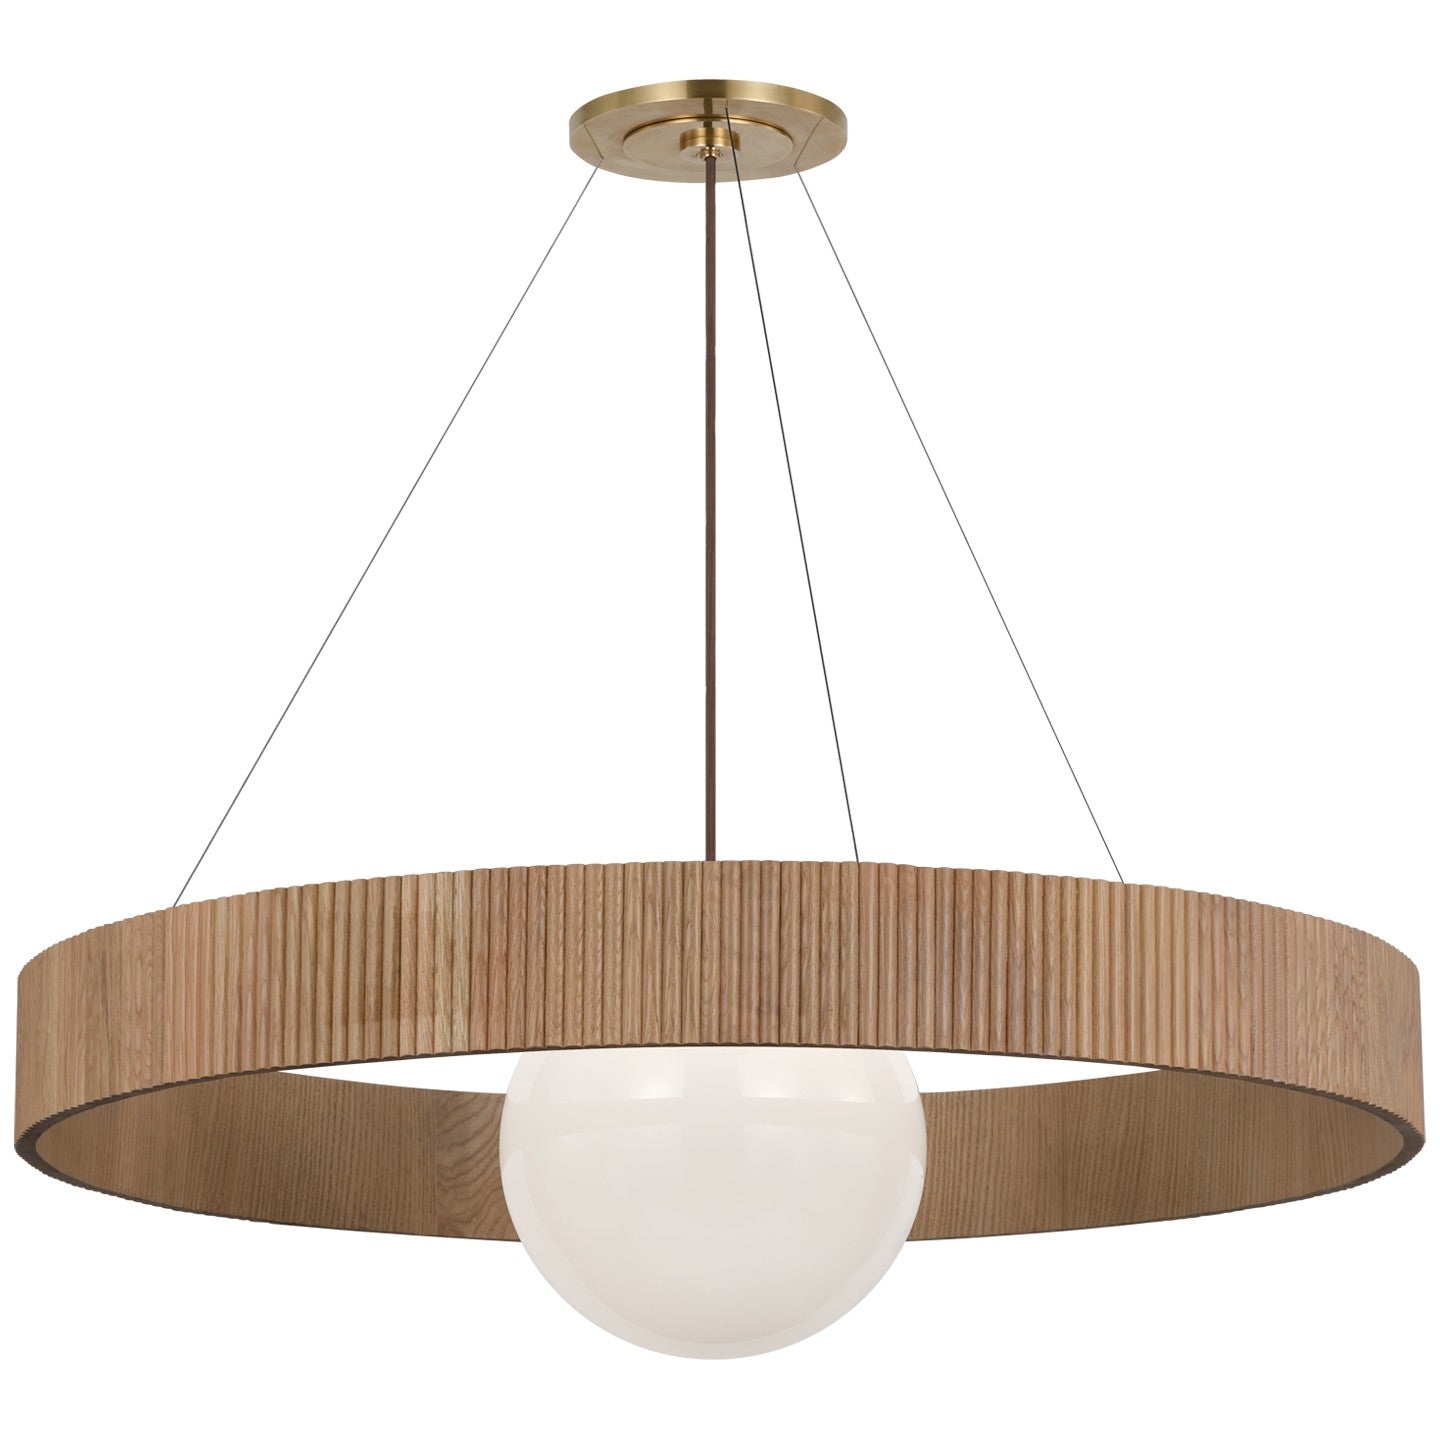 Visual Comfort Signature - WS 5001HAB/NO-WG - LED Chandelier - Arena - Hand-Rubbed Antique Brass and White Glass